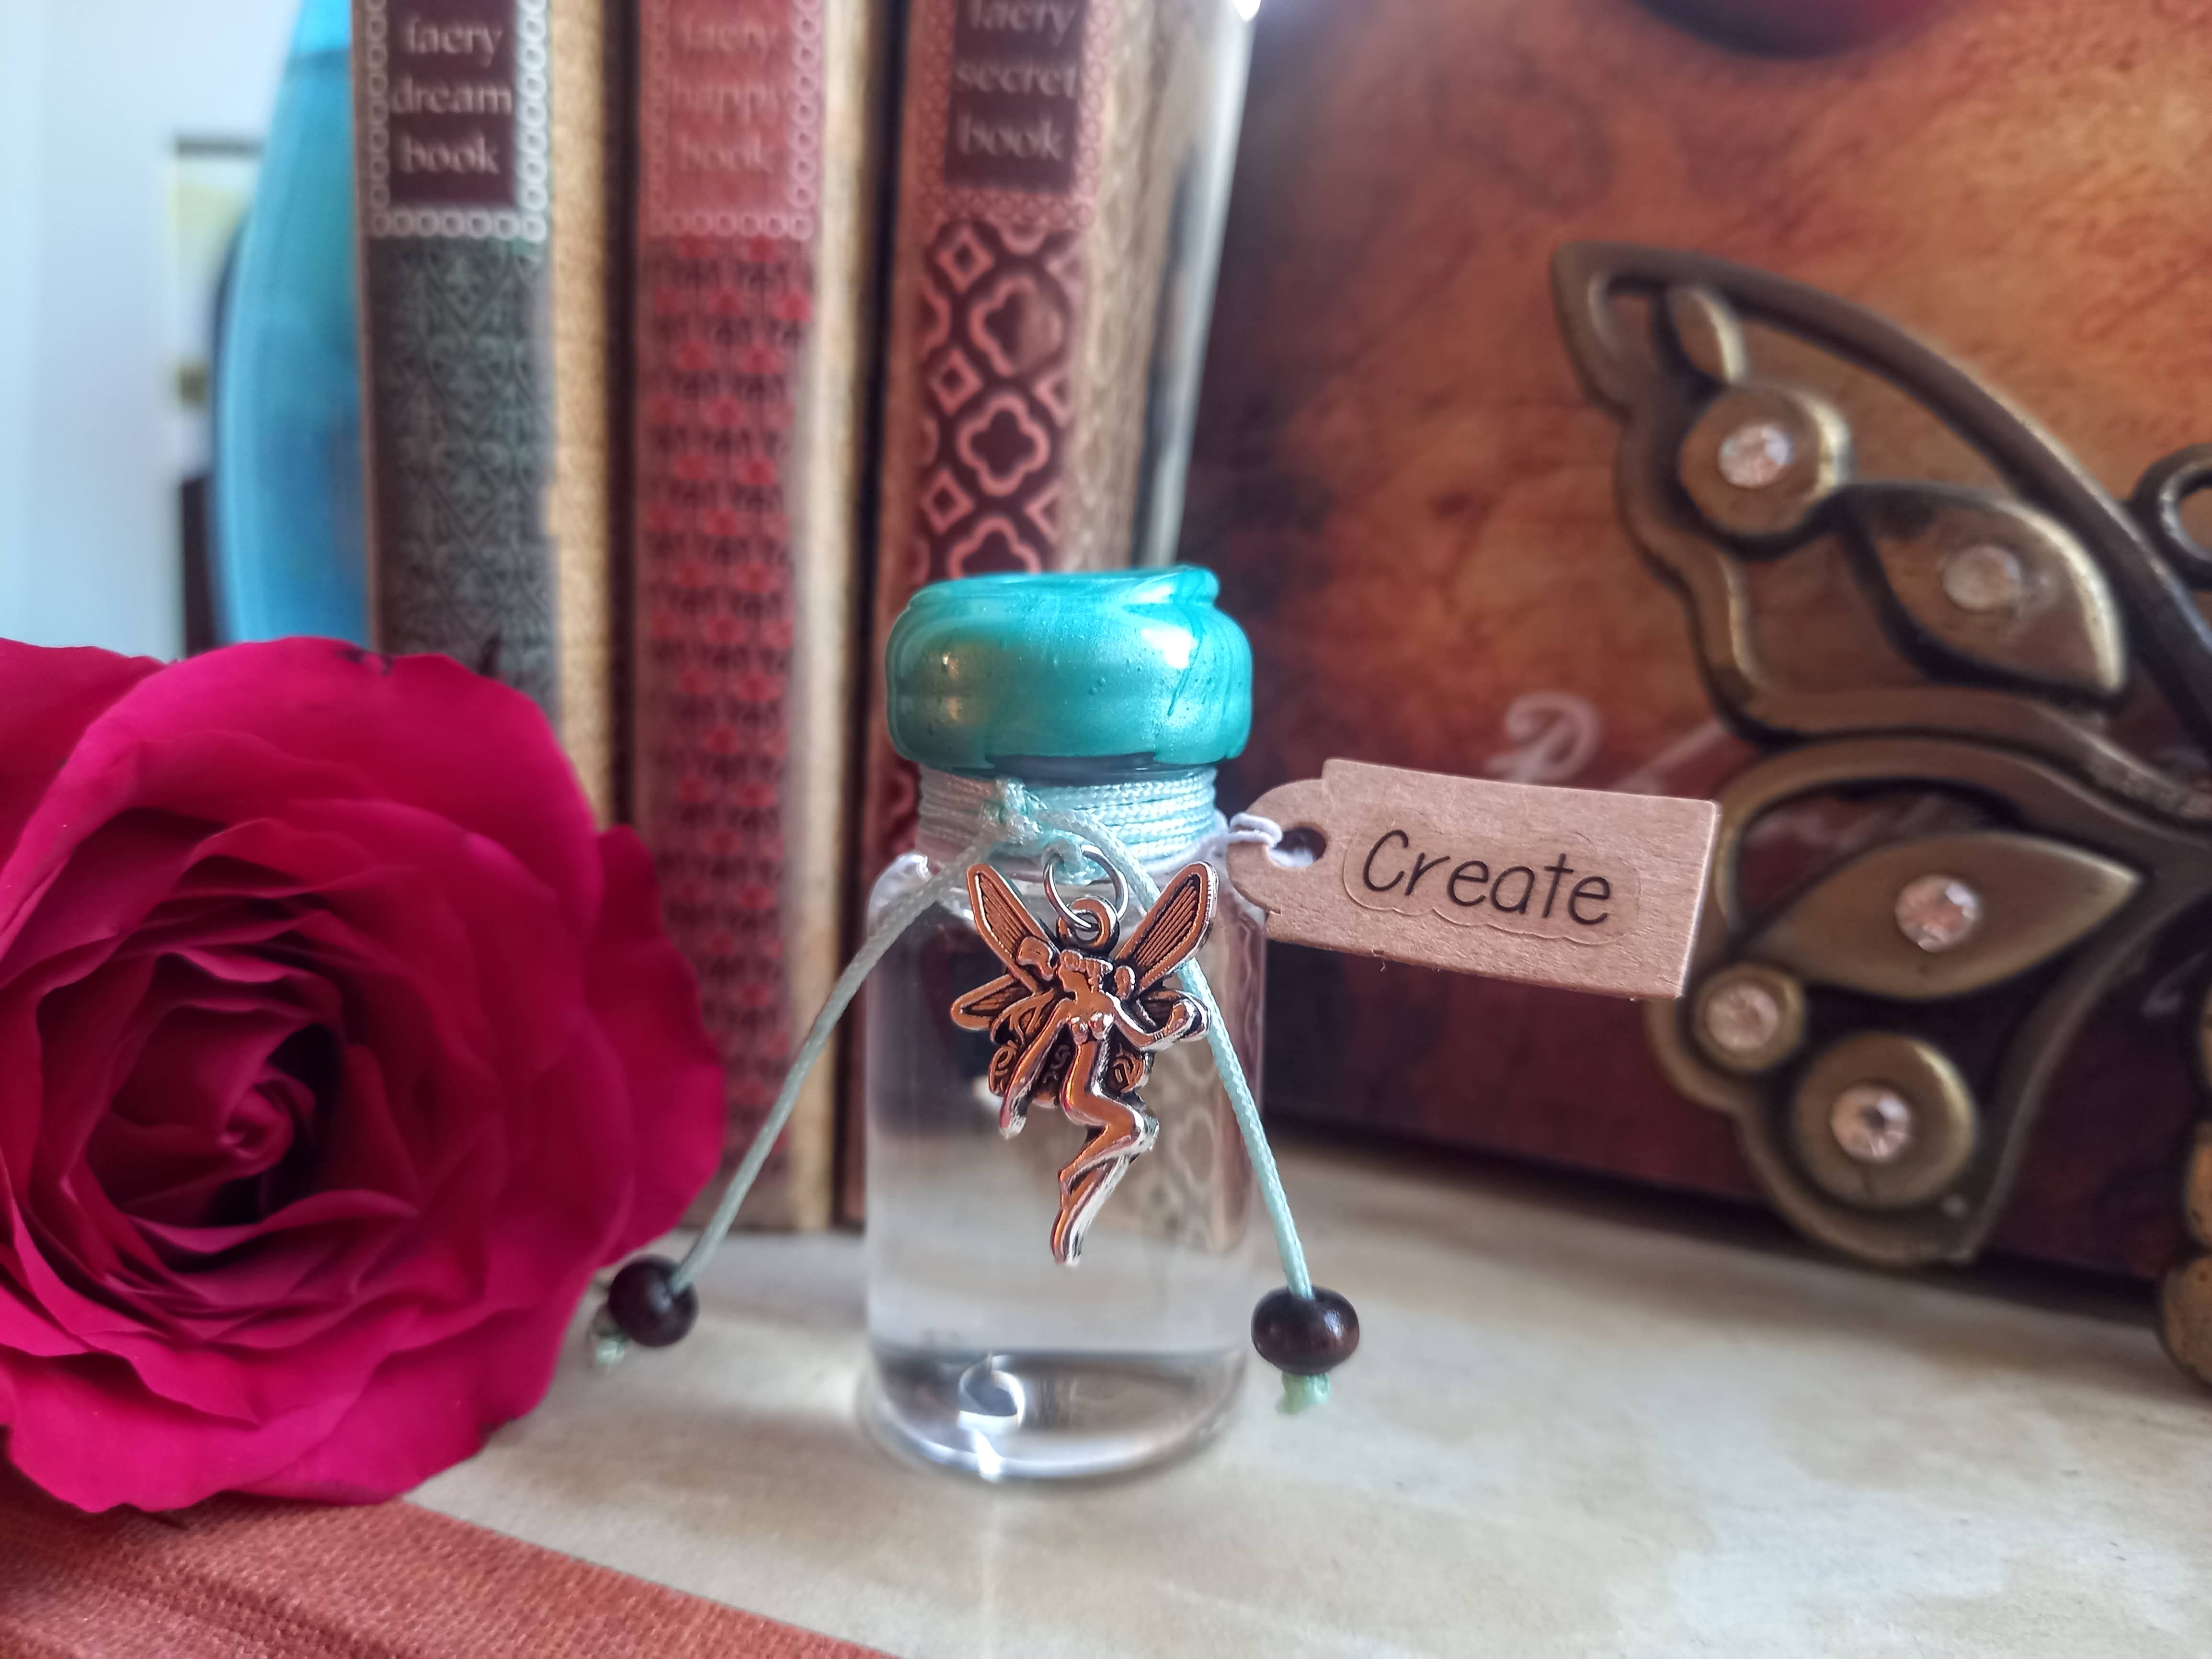 VIAL* Fairy Play Creativity - Charmed Vial filled with St.Brigid Well Water from an Irish Holy Well.